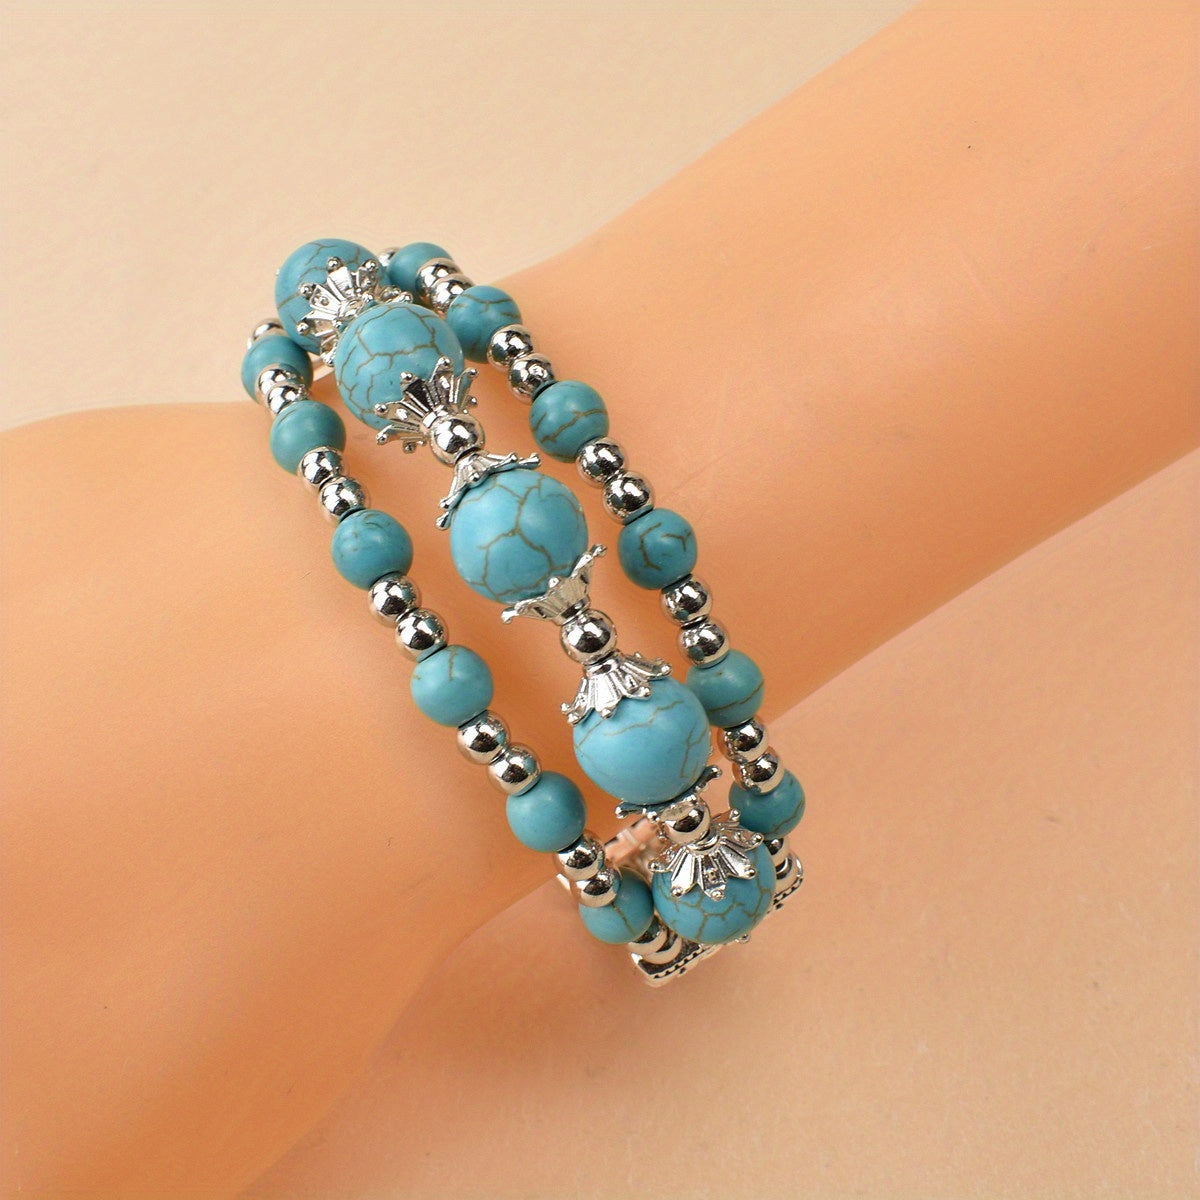 Add a touch of vintage boho charm with our Turquoise Bracelet for Women